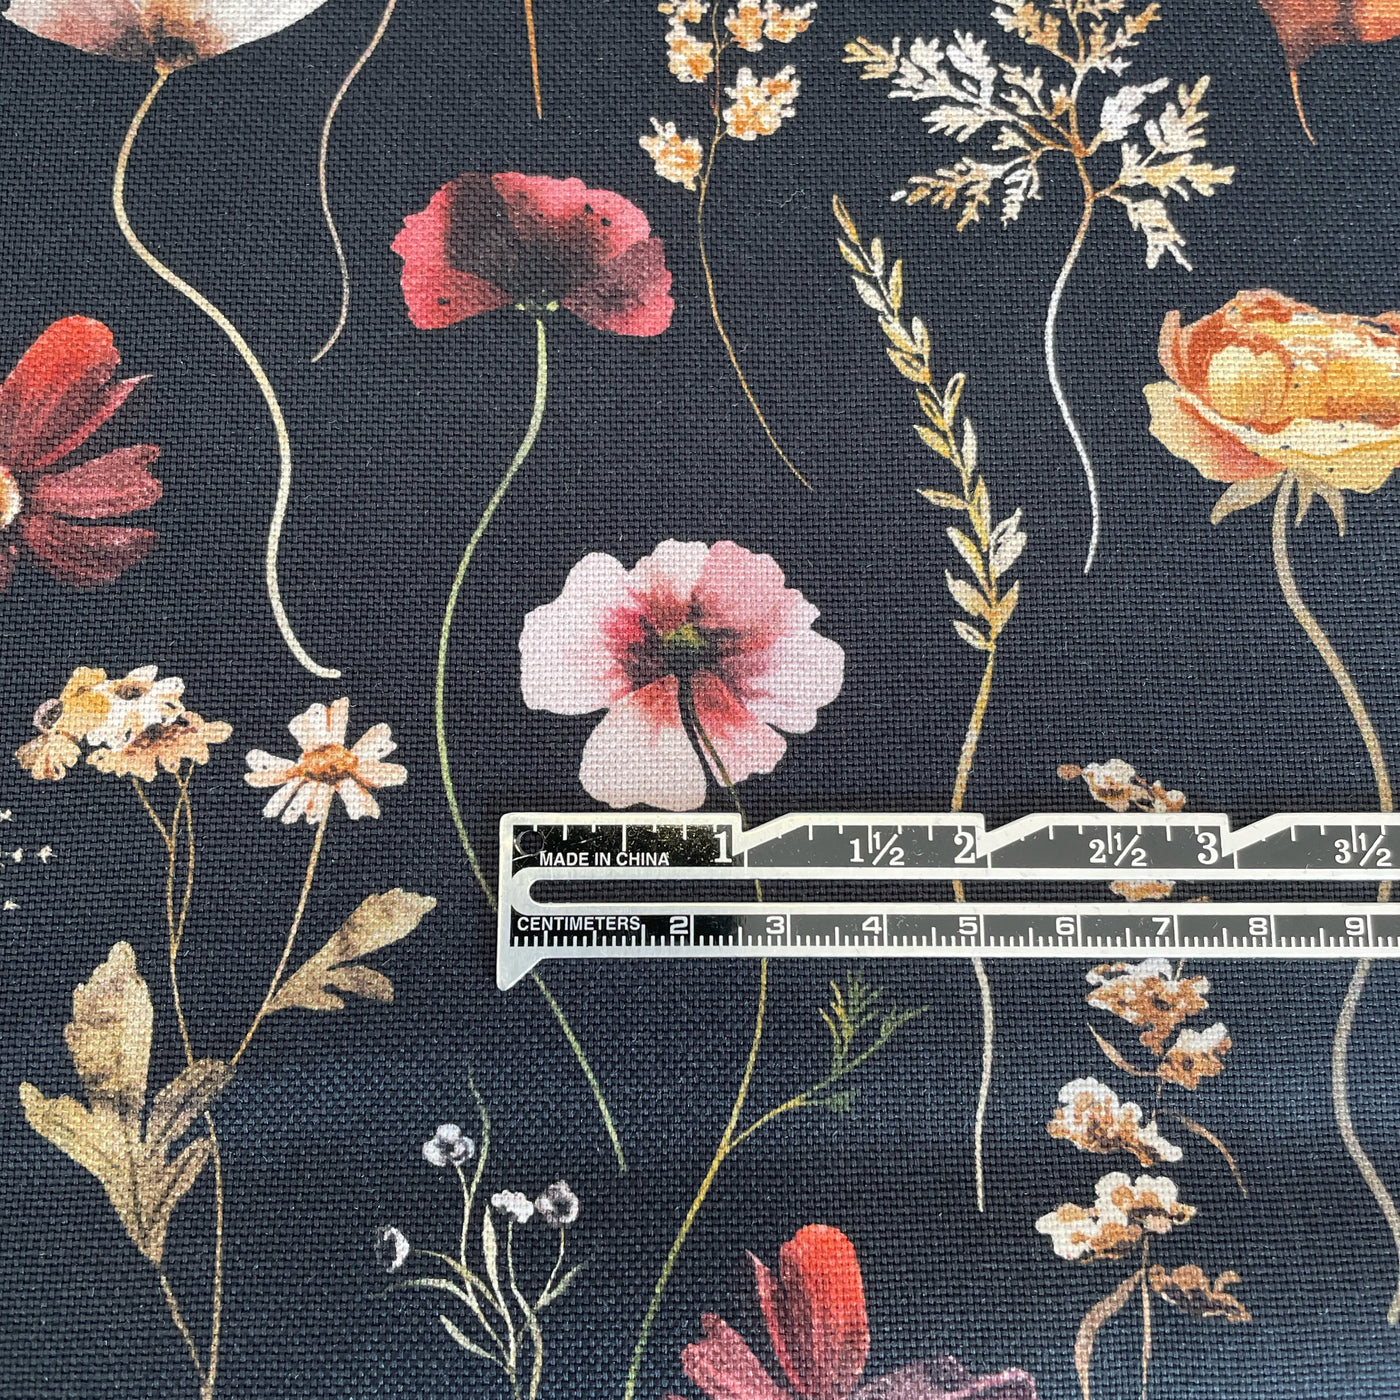 This stunning digitally printed 100% cotton floral design on a black background canvas &nbsp; It is a hardwearing Cotton woven canvas fabric, ideal for clothes, canvas bags, upholstery, etc